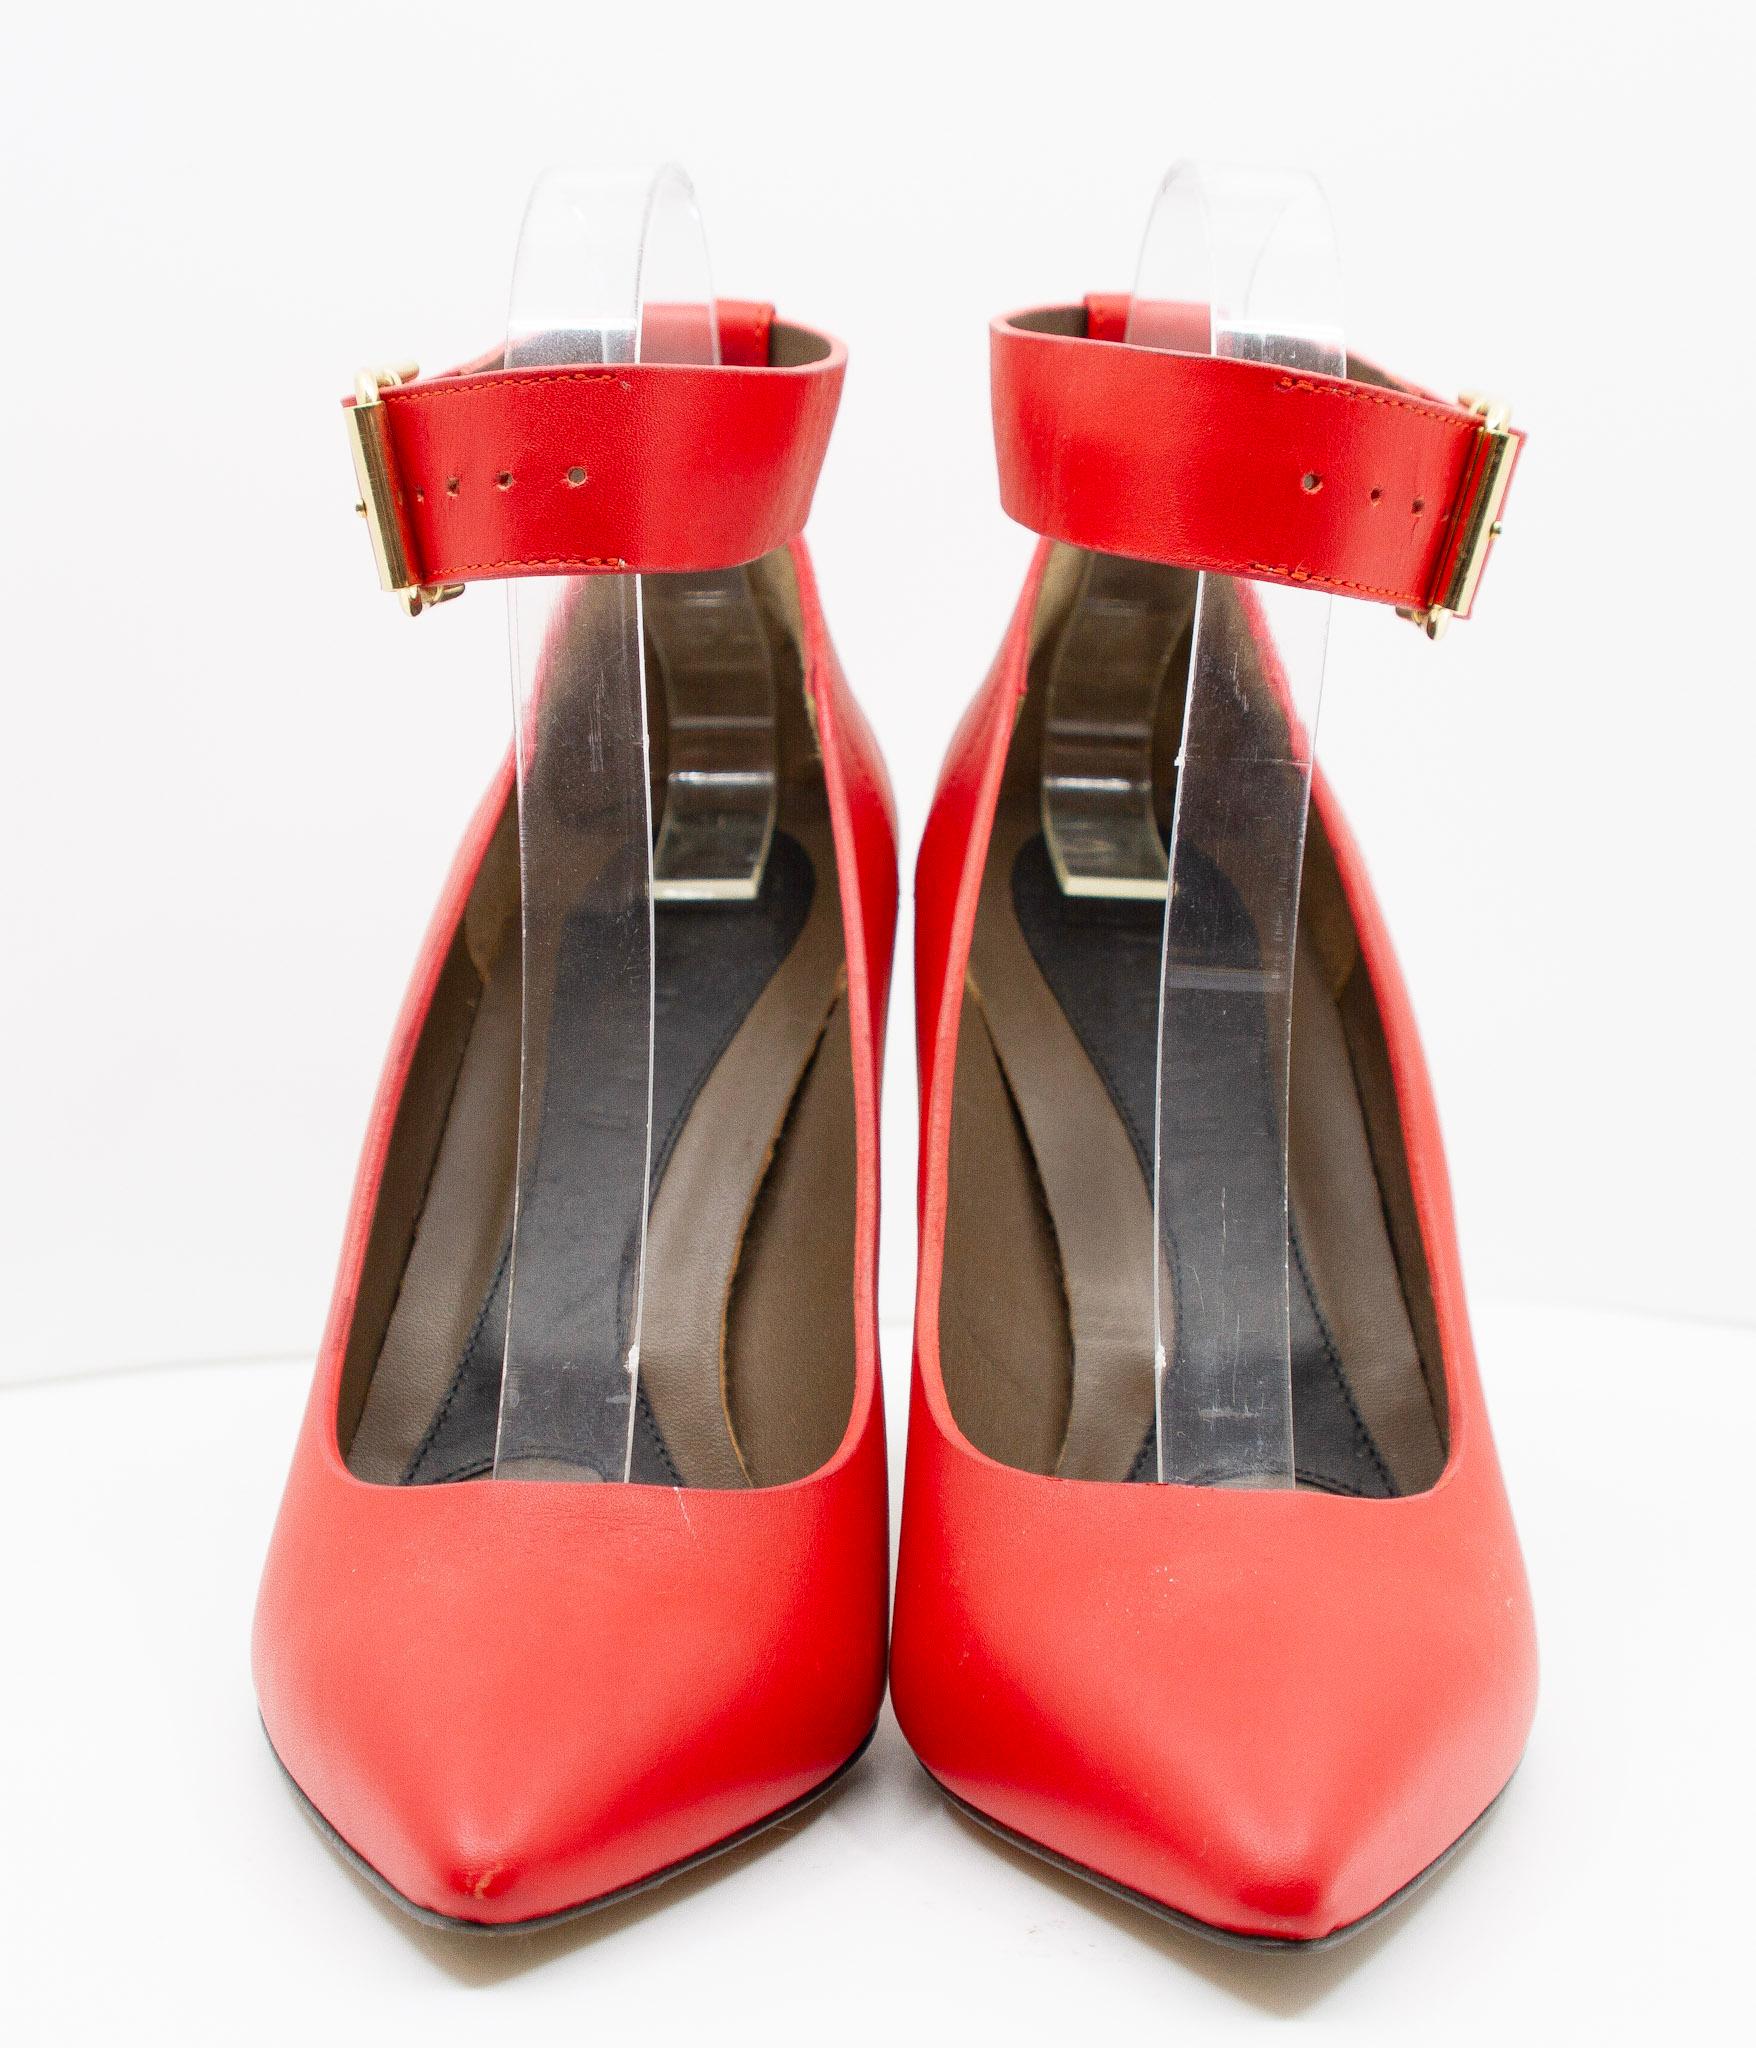 Marni red pumps with white heel and ankle strap
size EU 36 1/2 US 6 